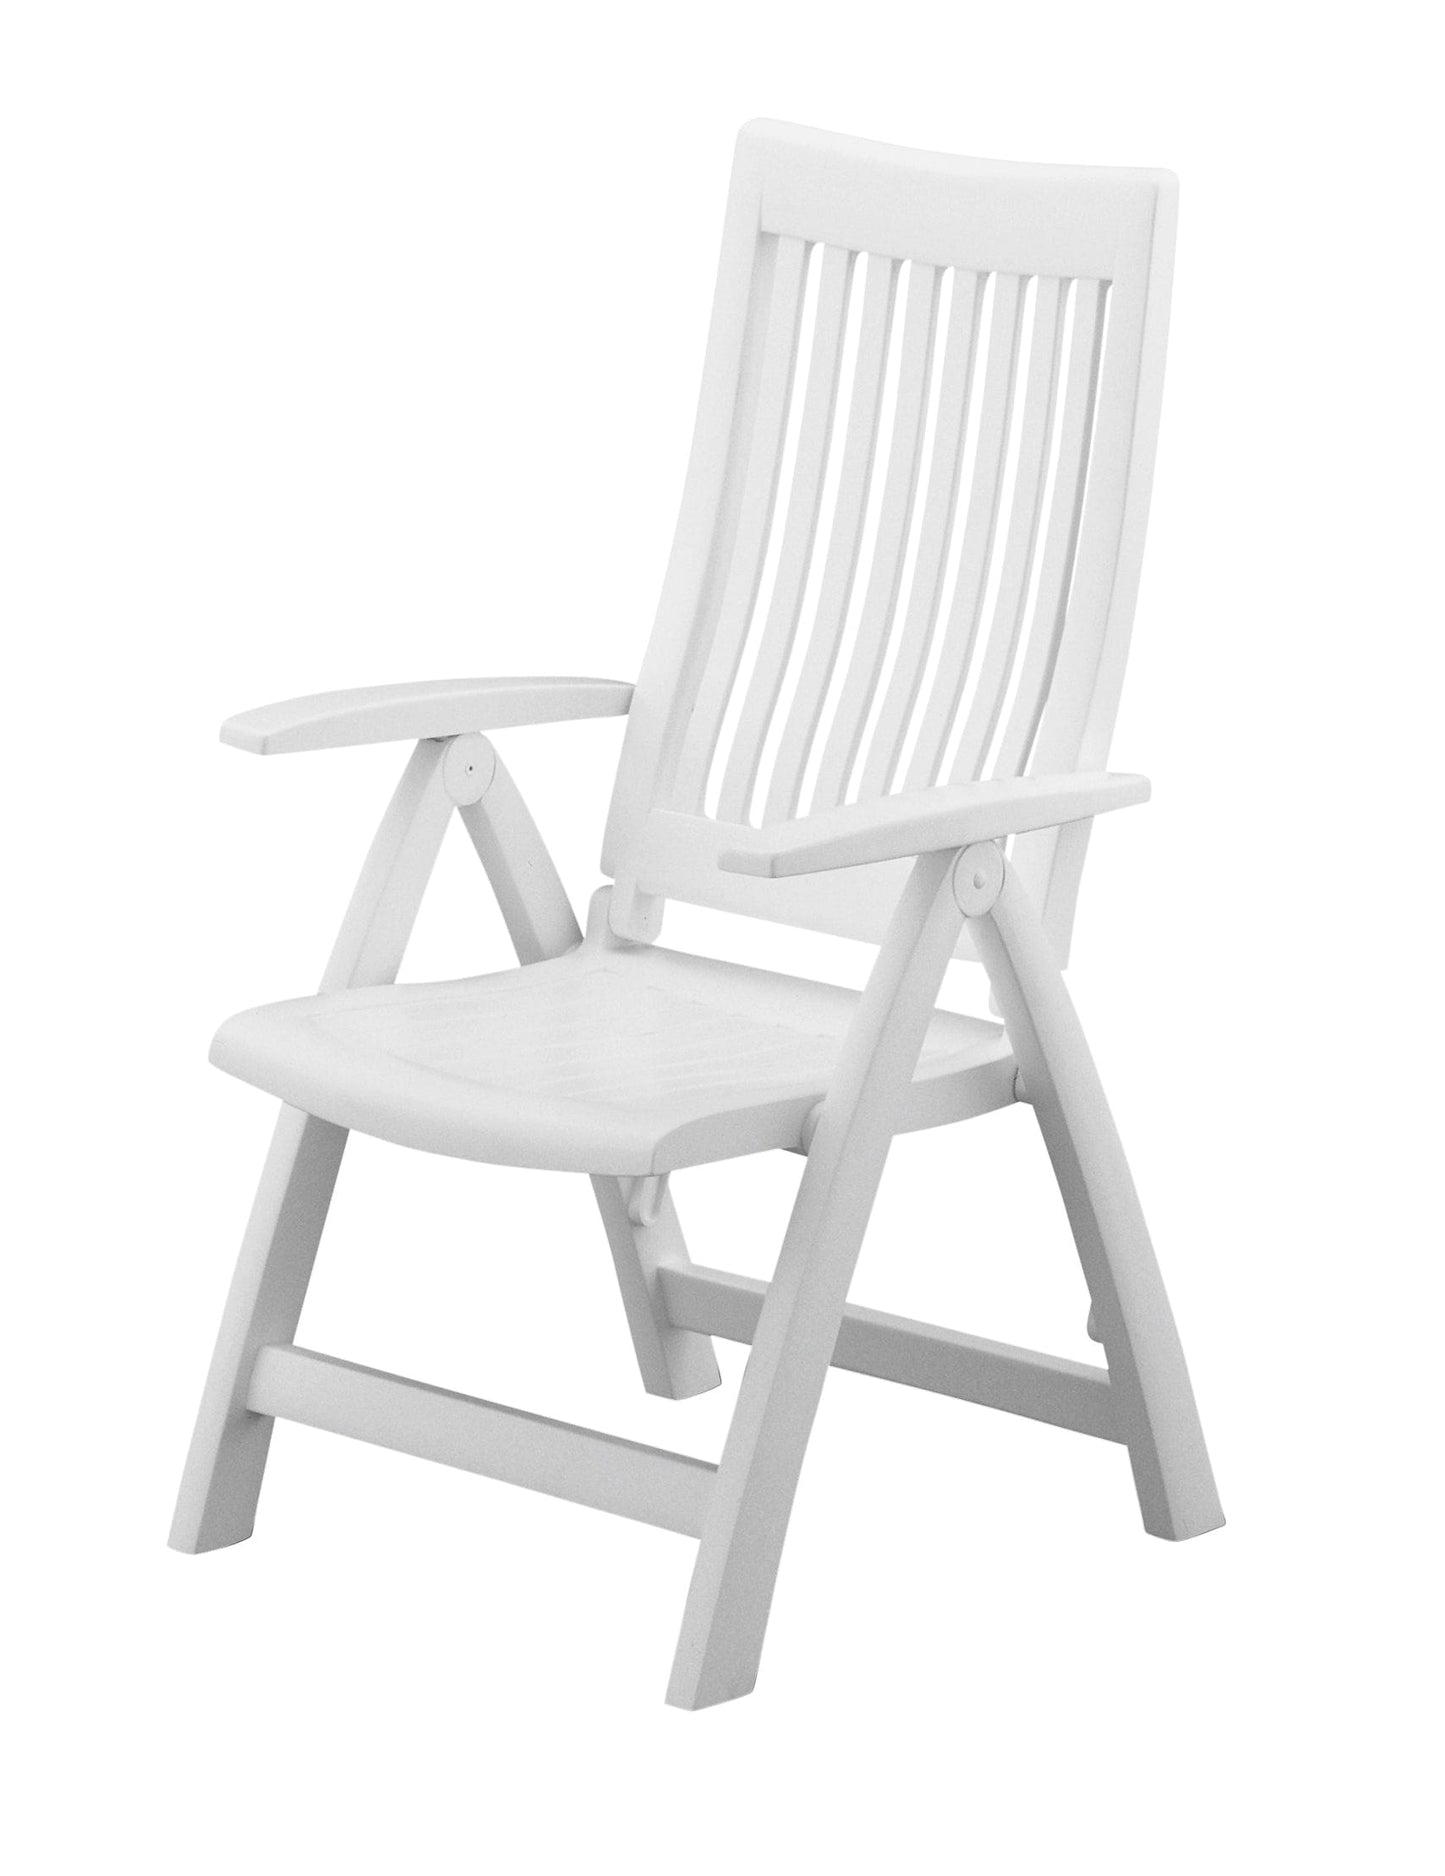 3 year guarantee on recyclable chair